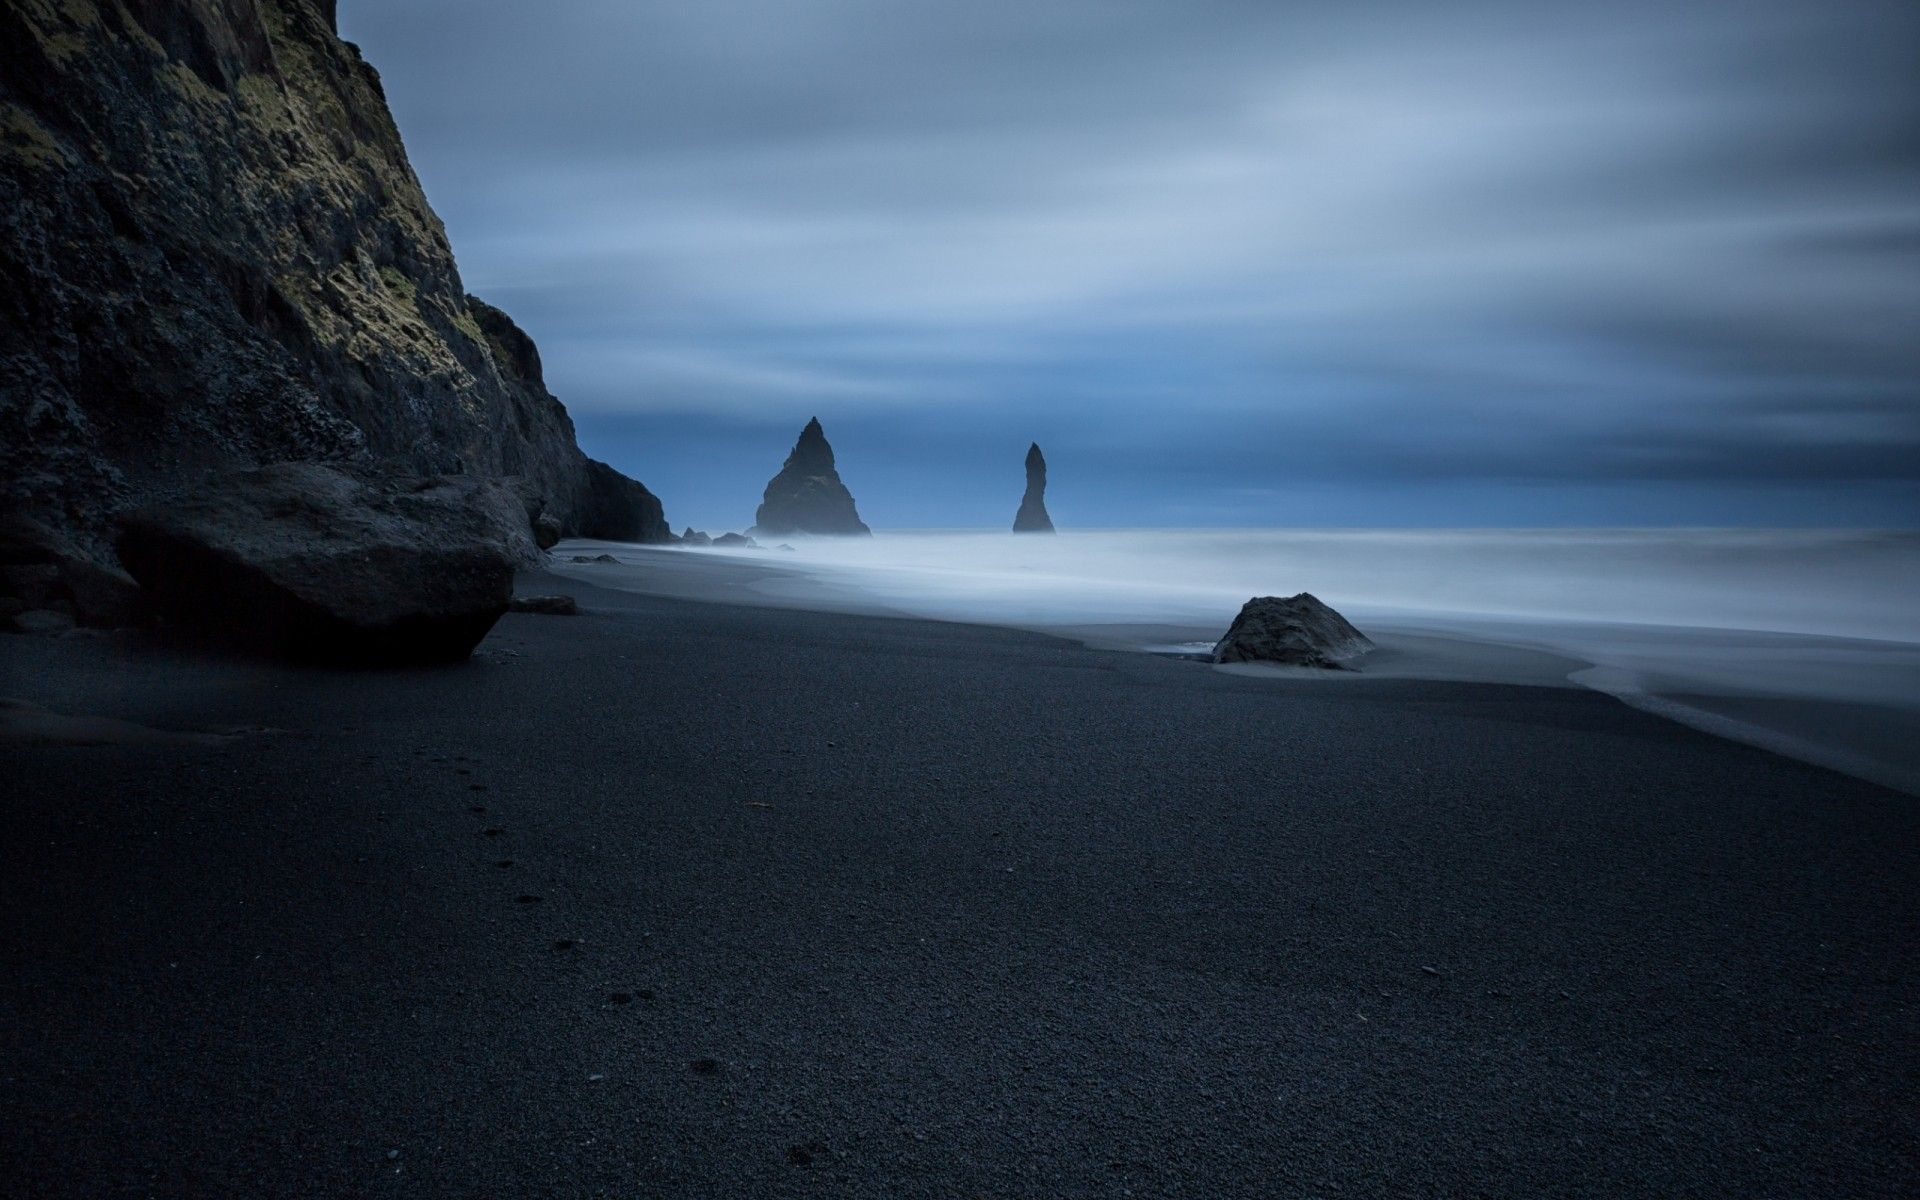 Traces of the animal on the black sand beach Desktop wallpaper 1920x1080